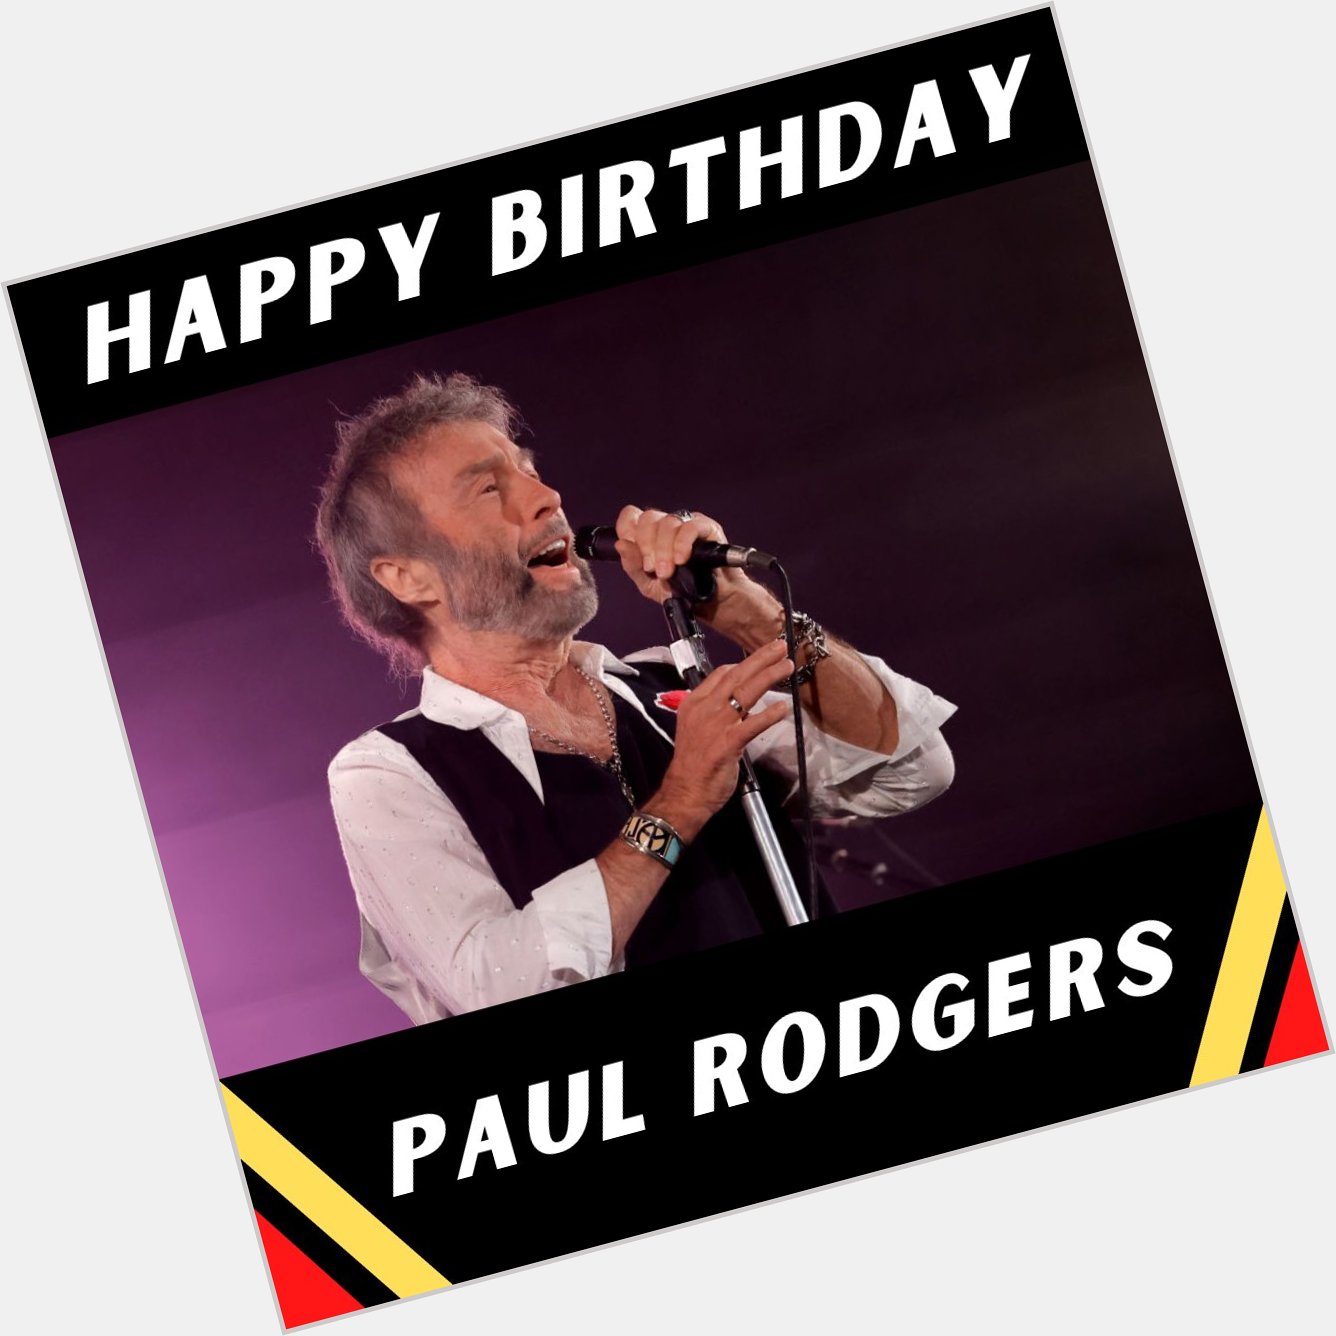 Wishing a happy birthday to leader Paul Rodgers Kevin Winter/Getty Images 